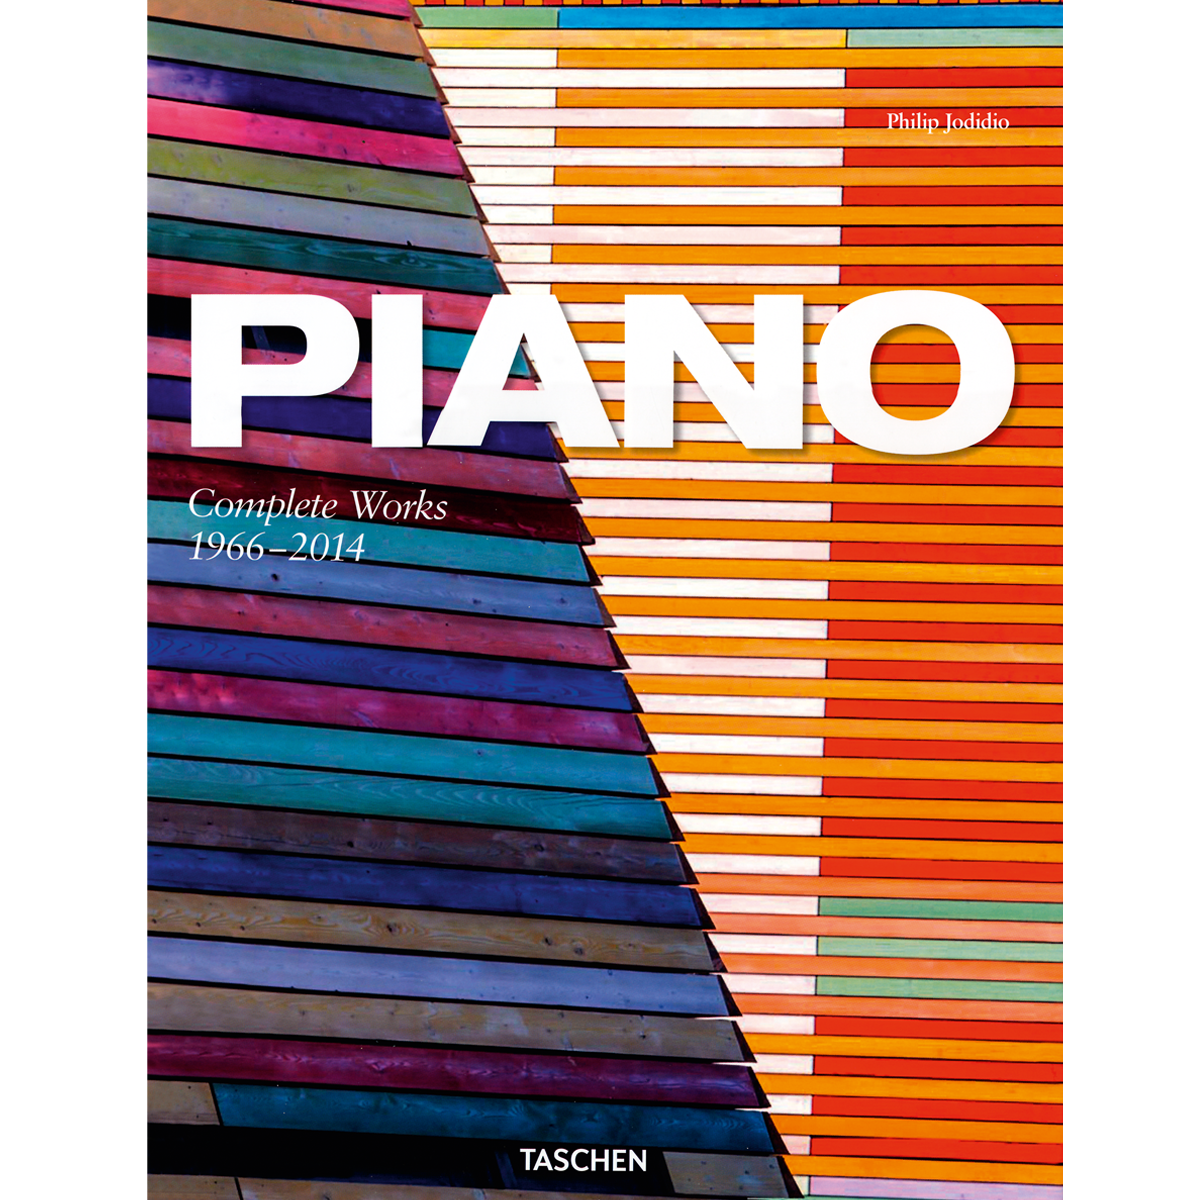 Piano. Complete Works, 1966-2014